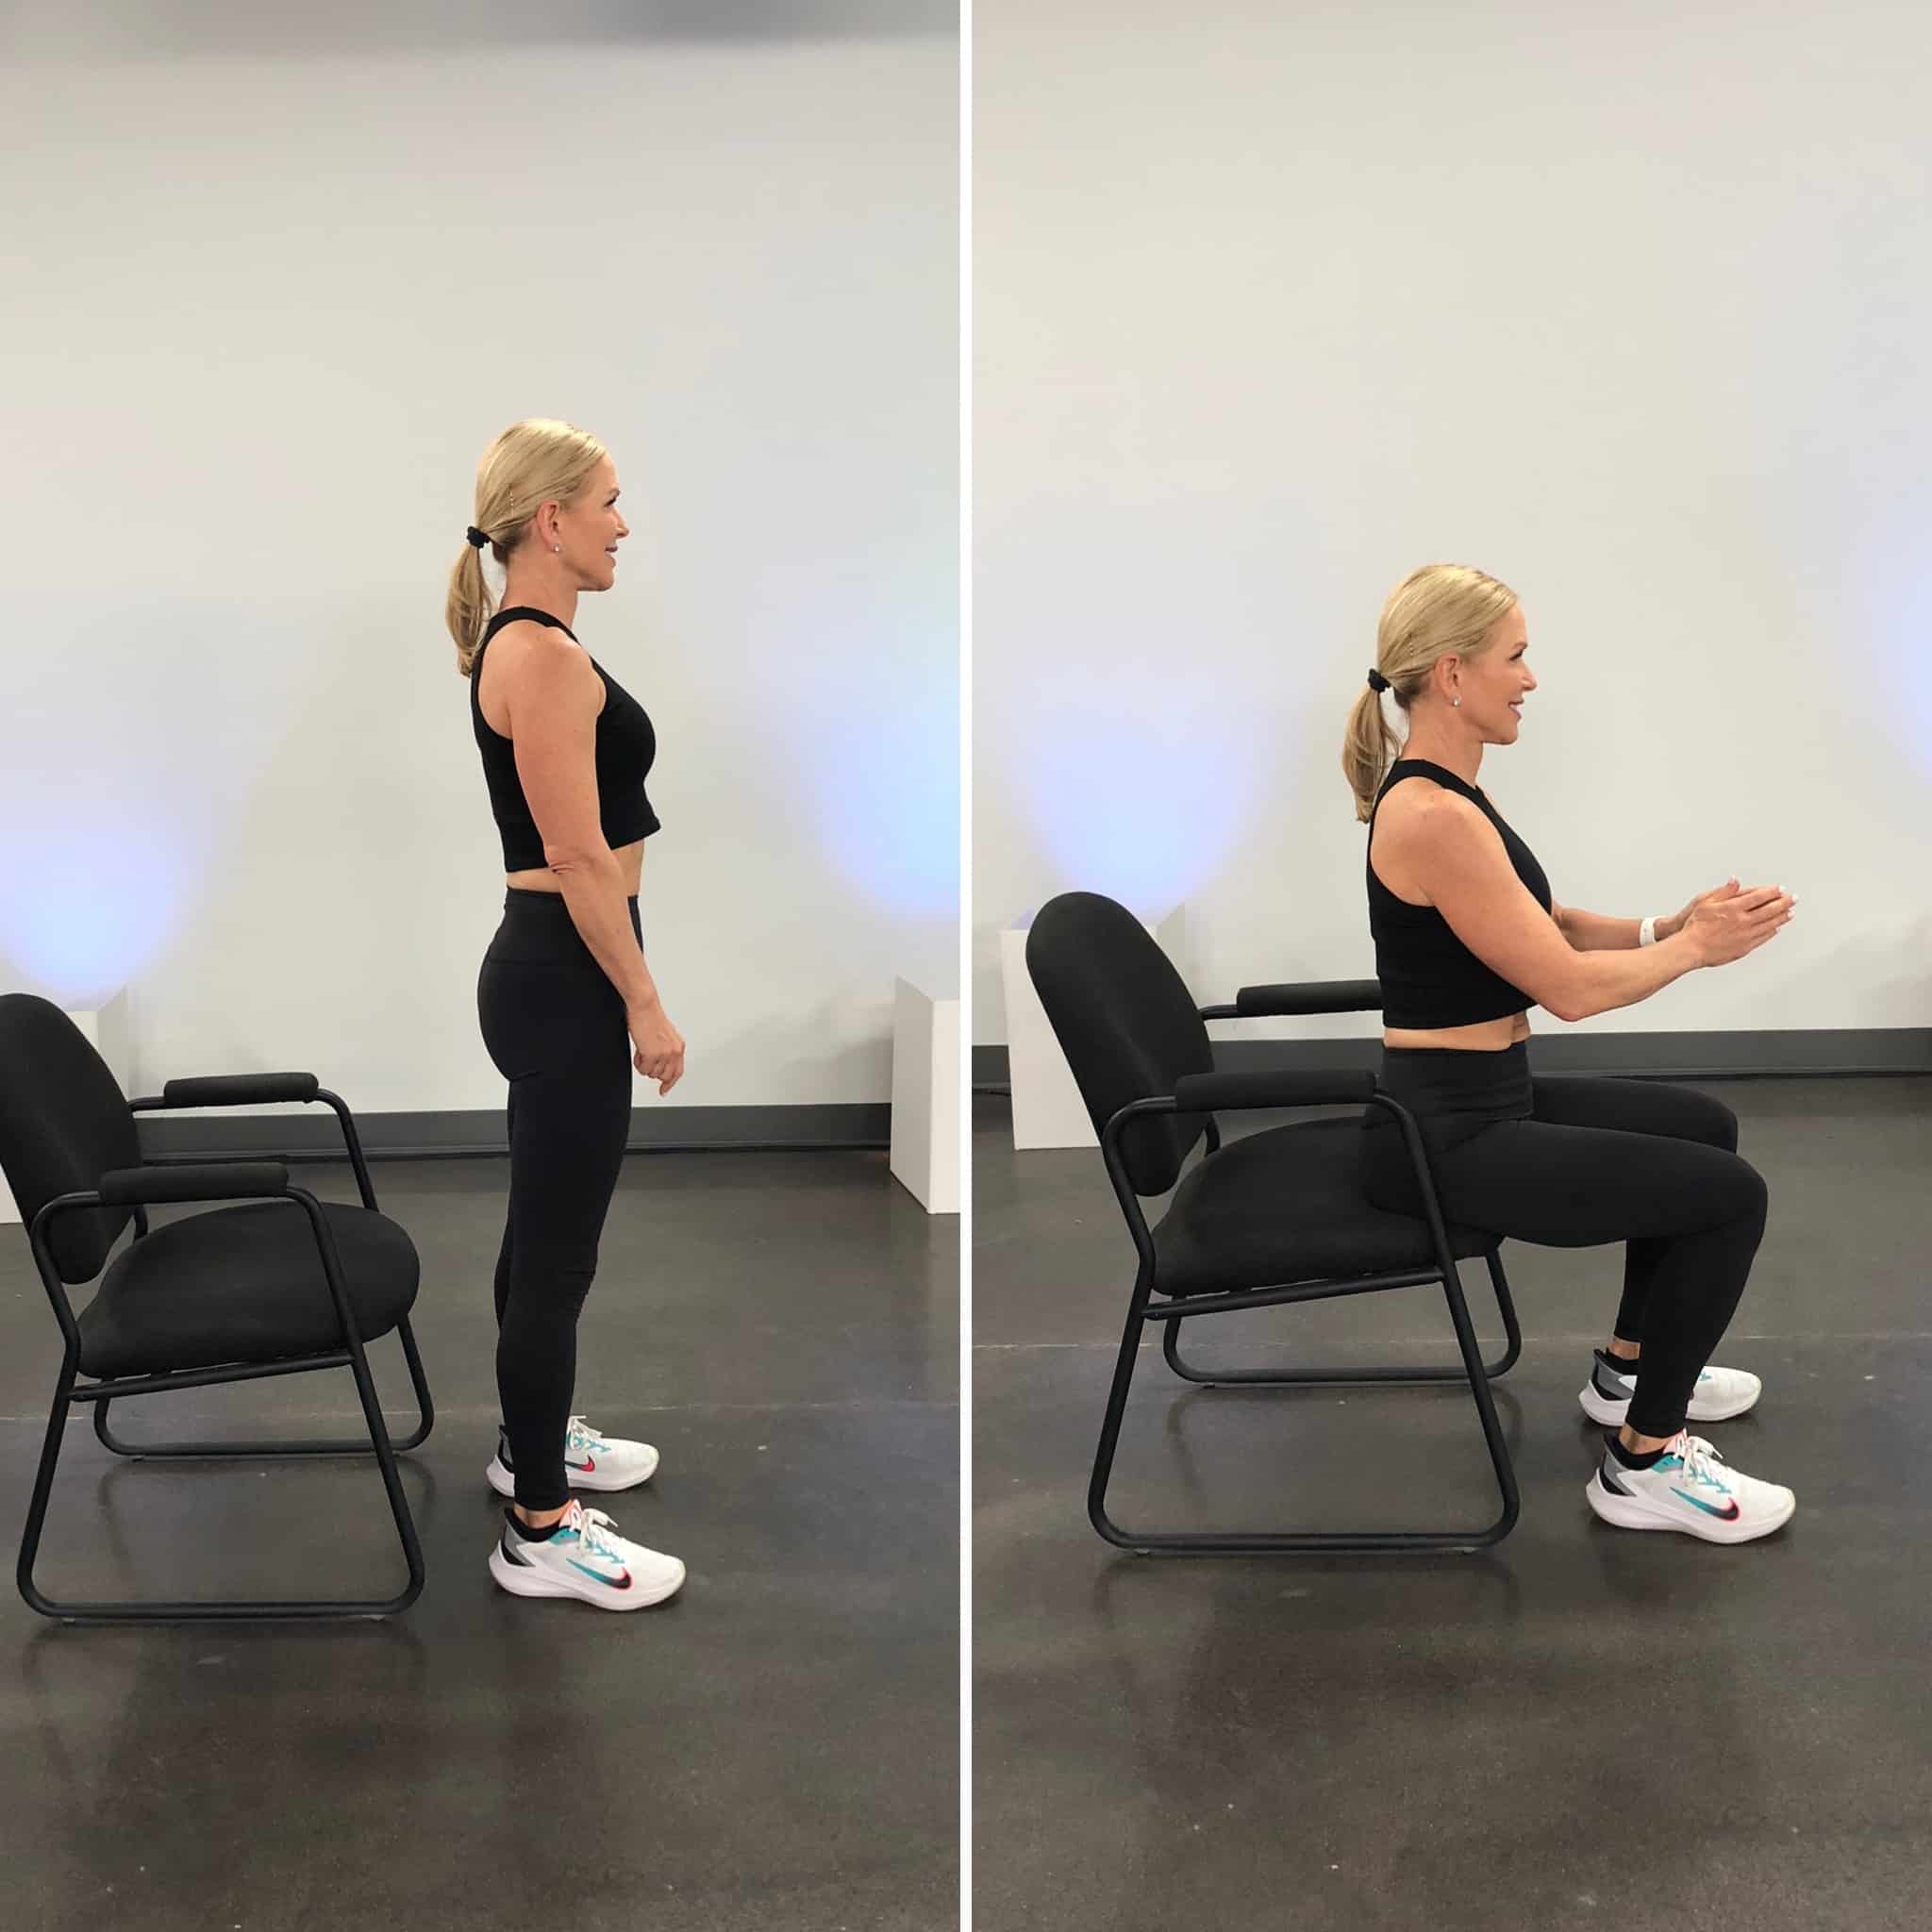 Chris Freytag demonstrating the two positions of a chair squat using a black chair to improve balance